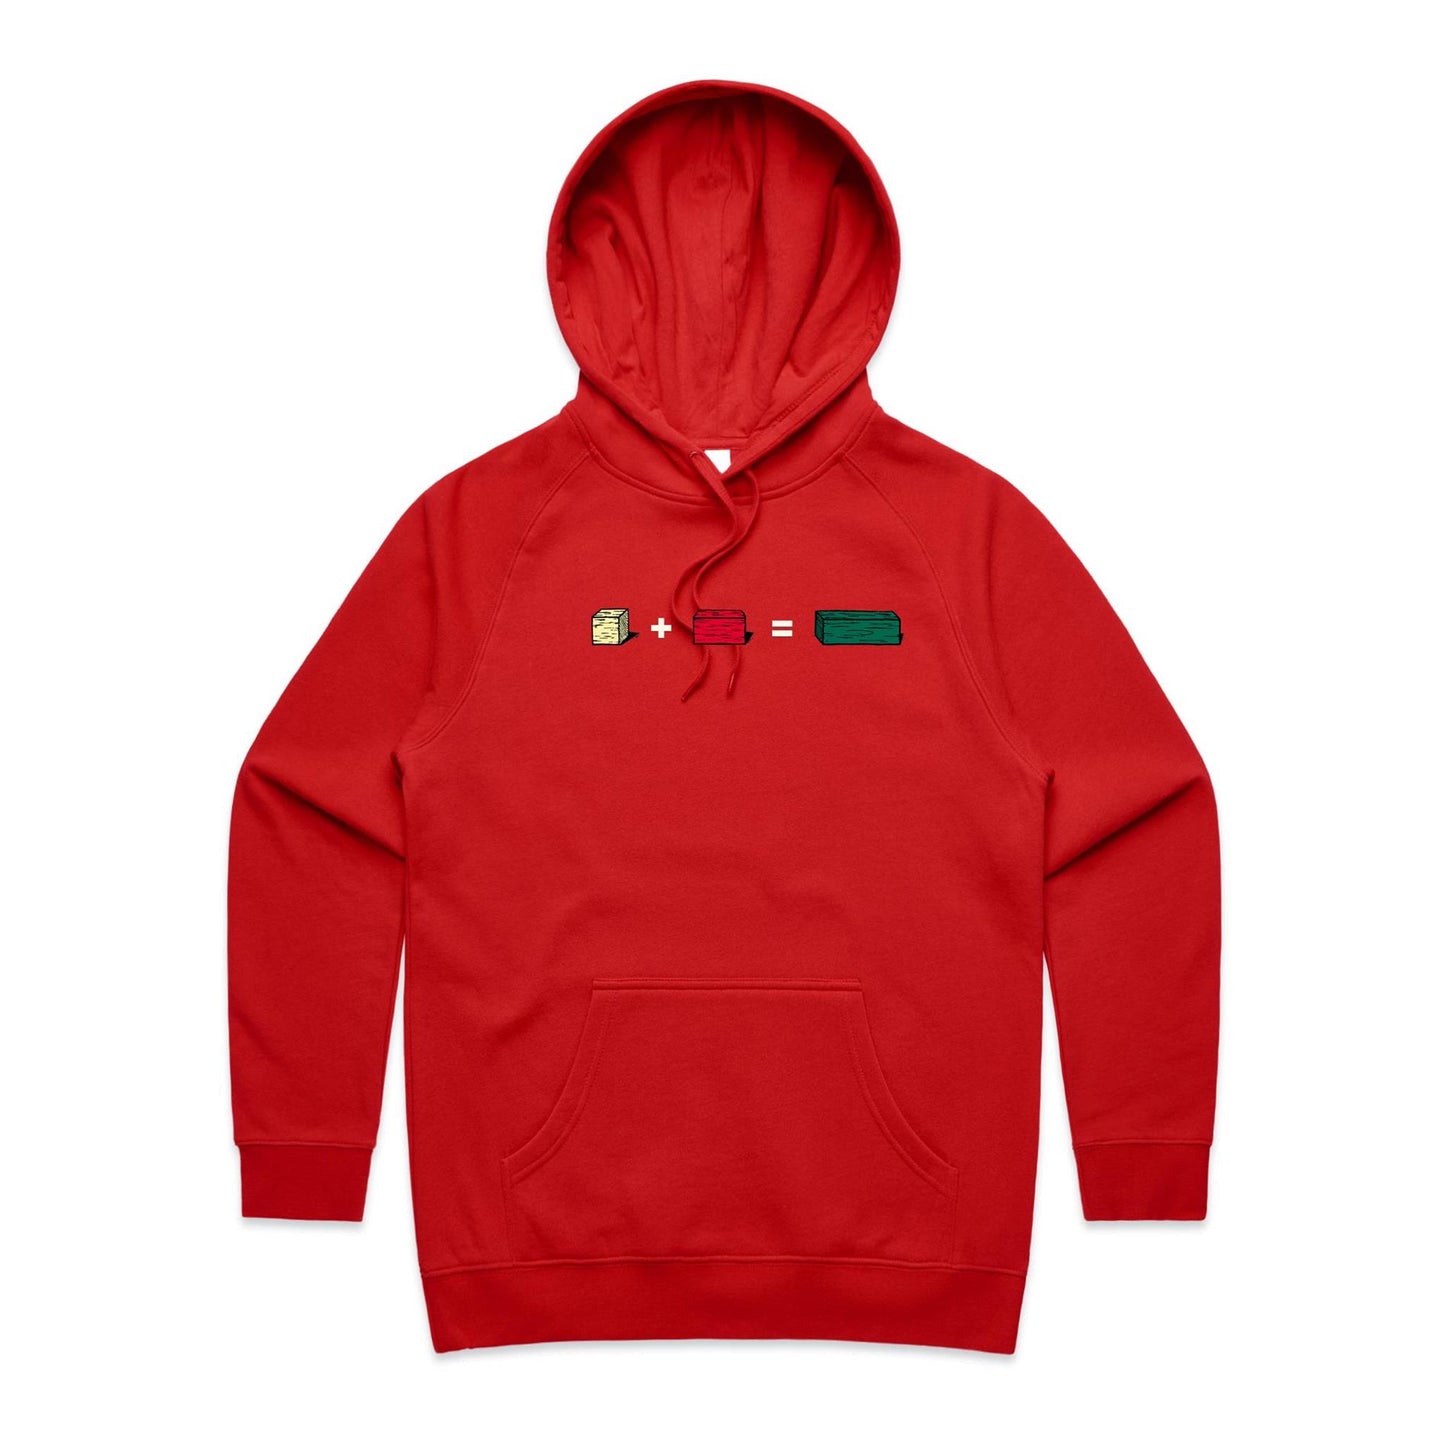 Cuisenaire Rods Hoodies for Women